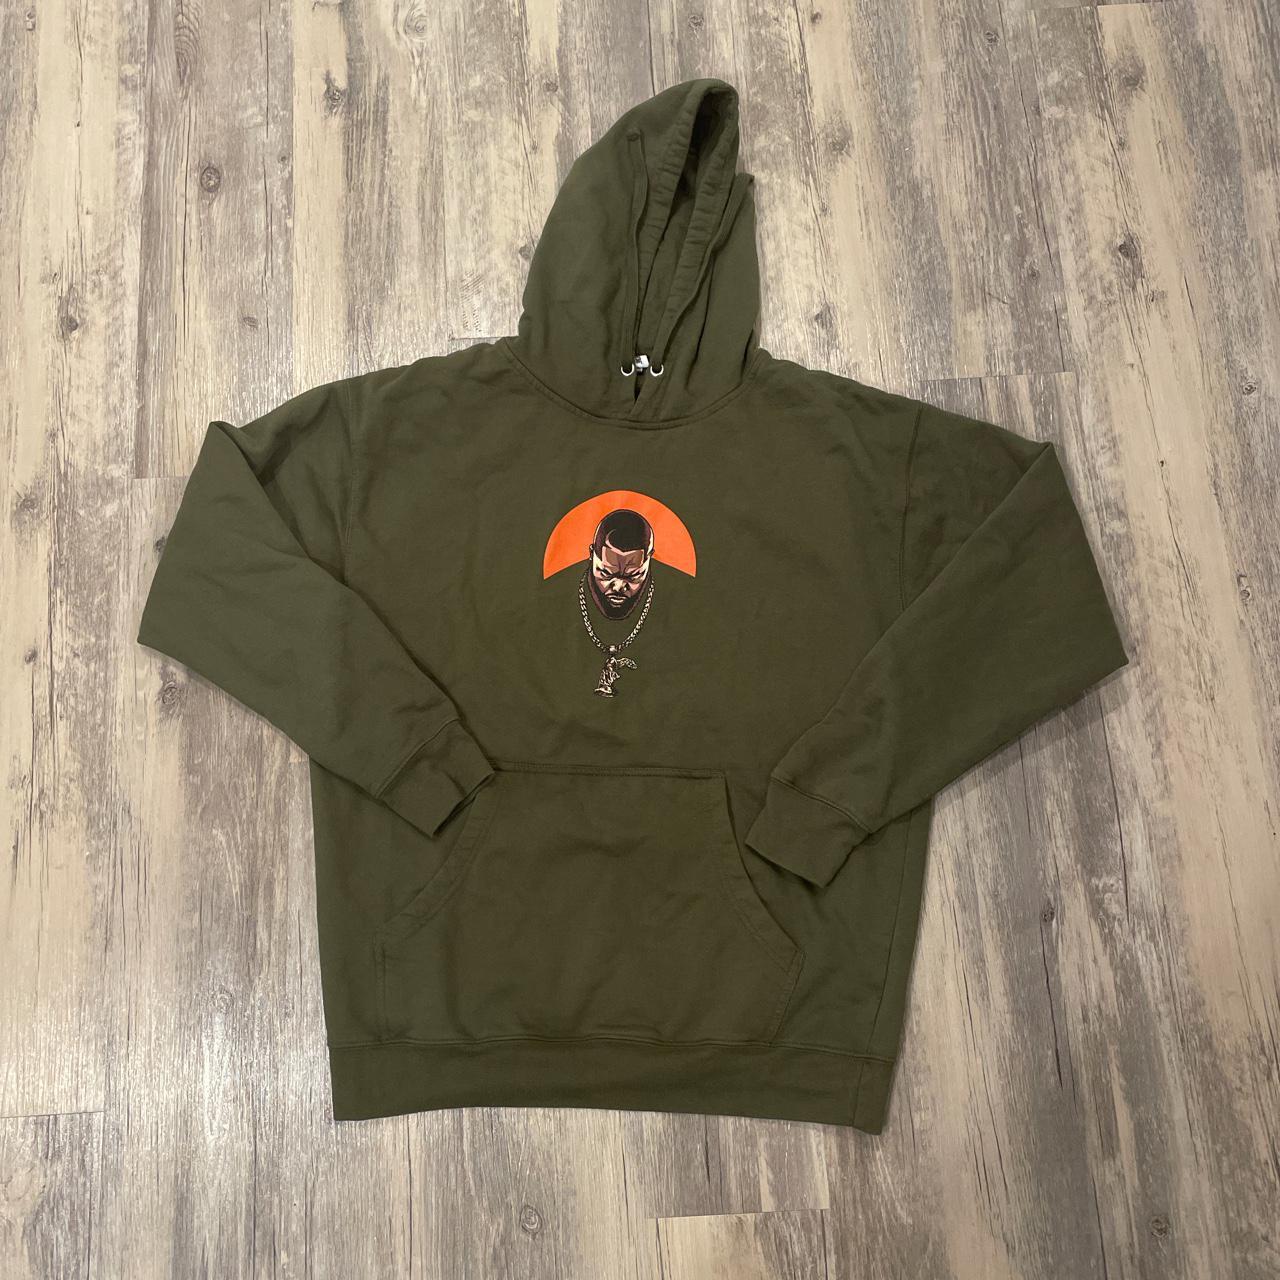 Product Image 1 - Olive green hoodie
Size: Large (